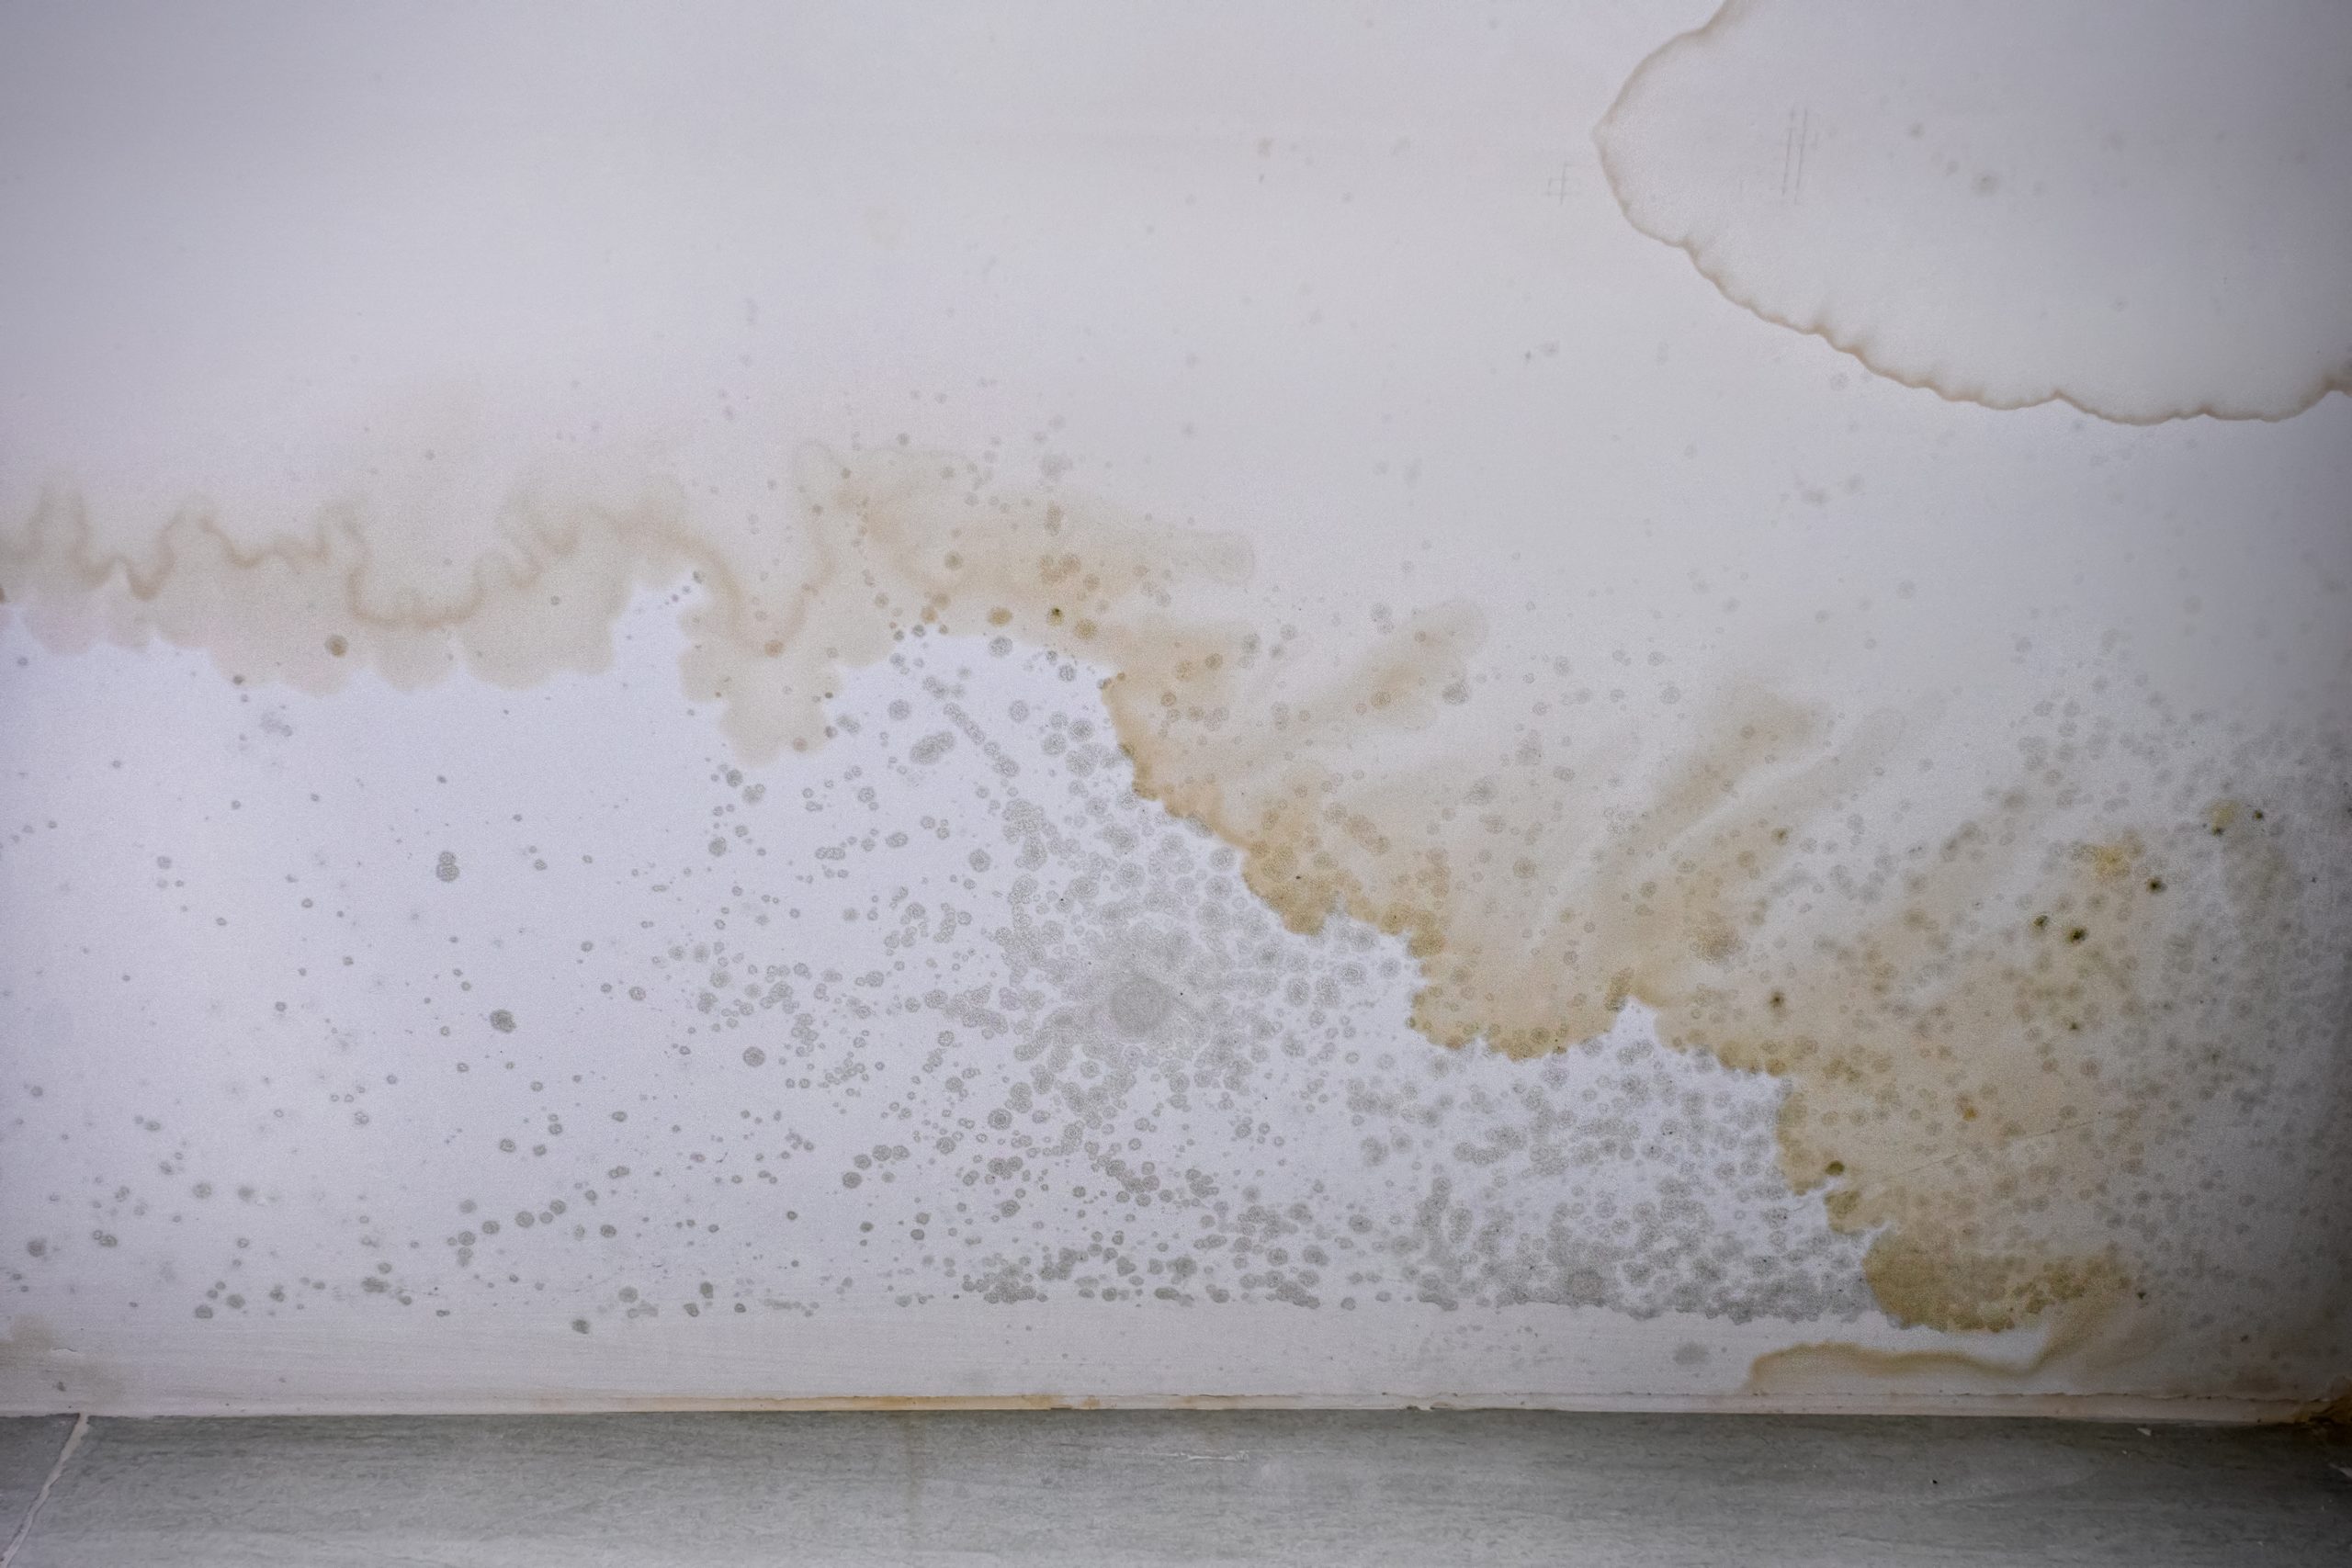 Mold on the ceiling.